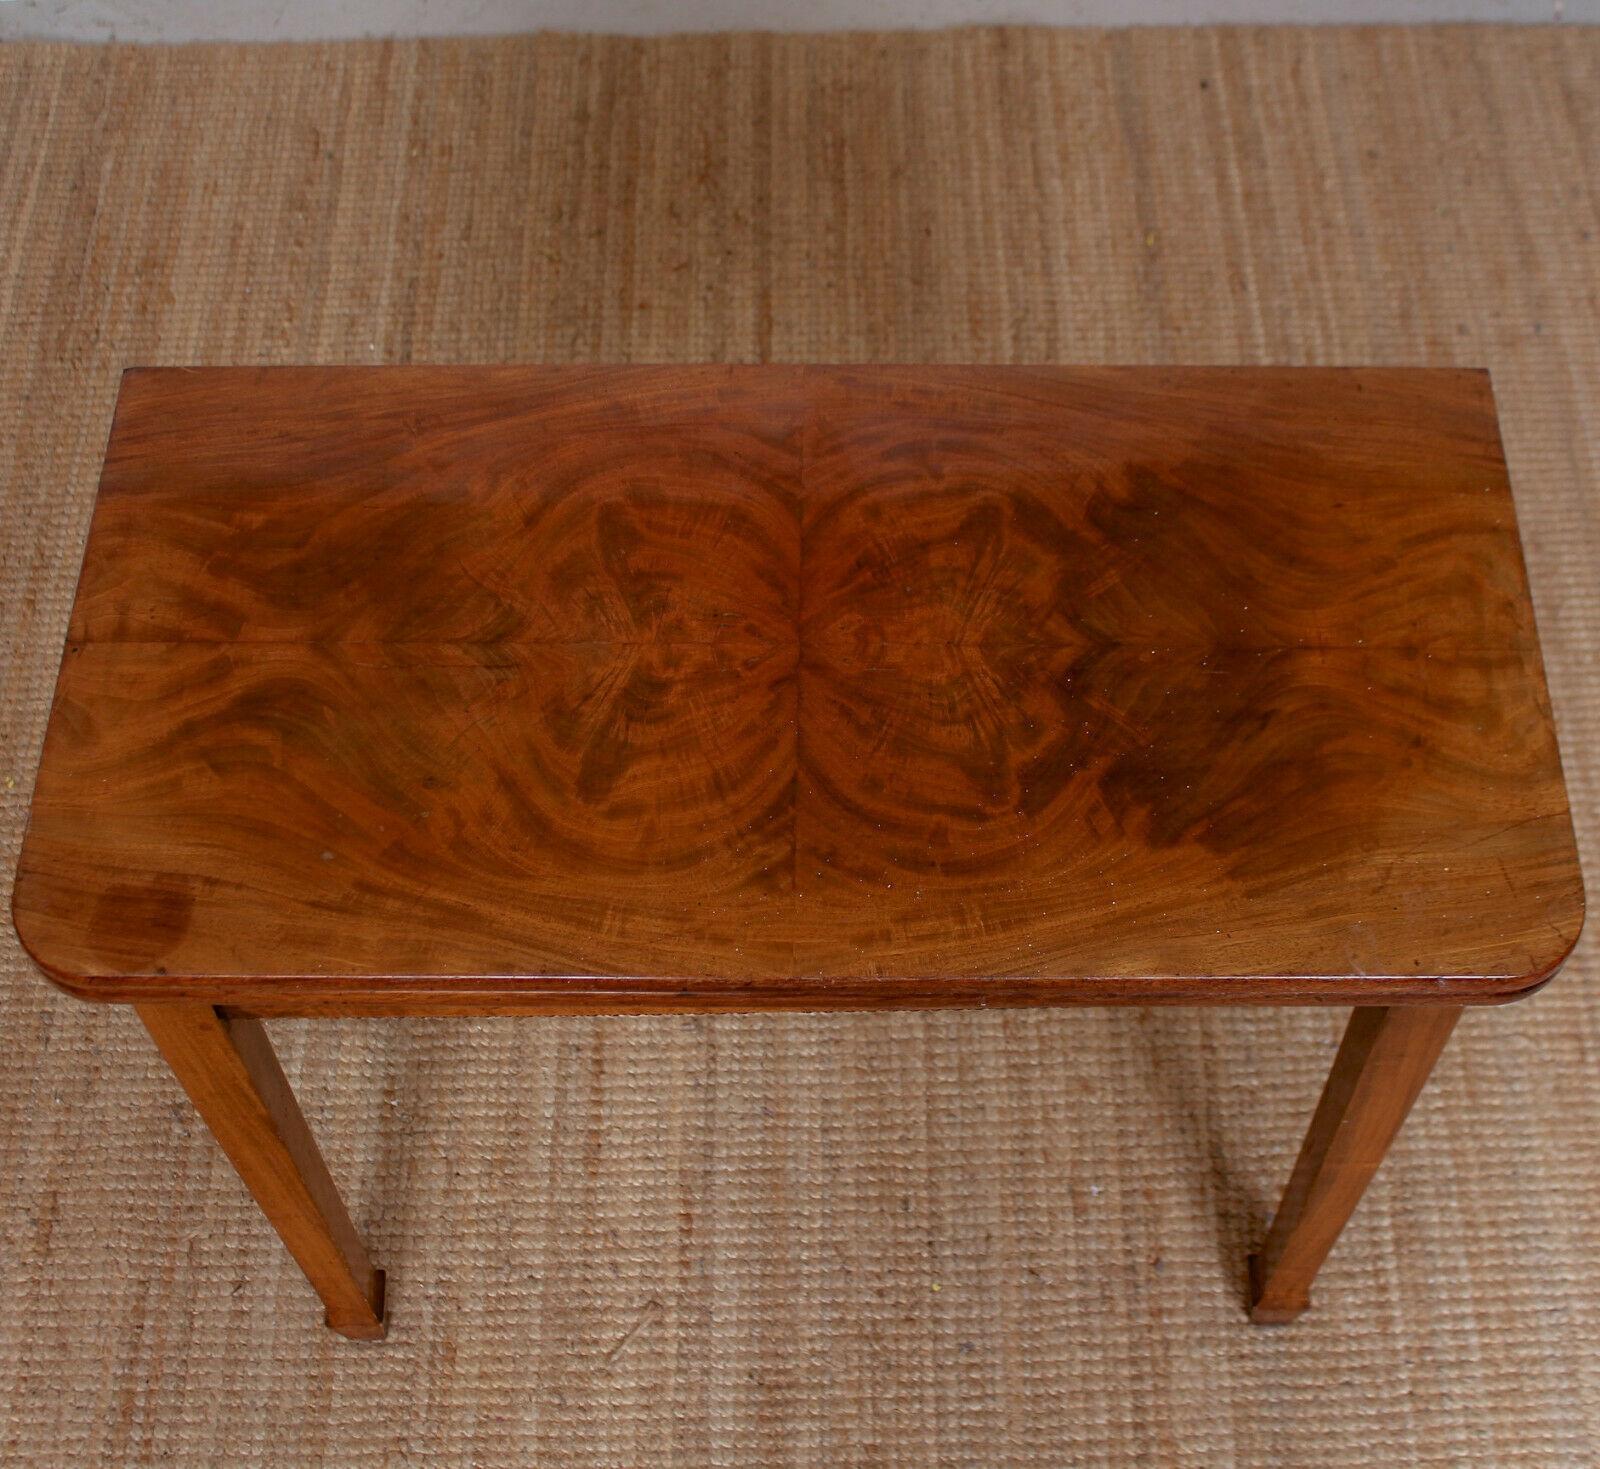 English Writing Table 19th Century Flamed Mahogany Folding Card Console Table For Sale 2